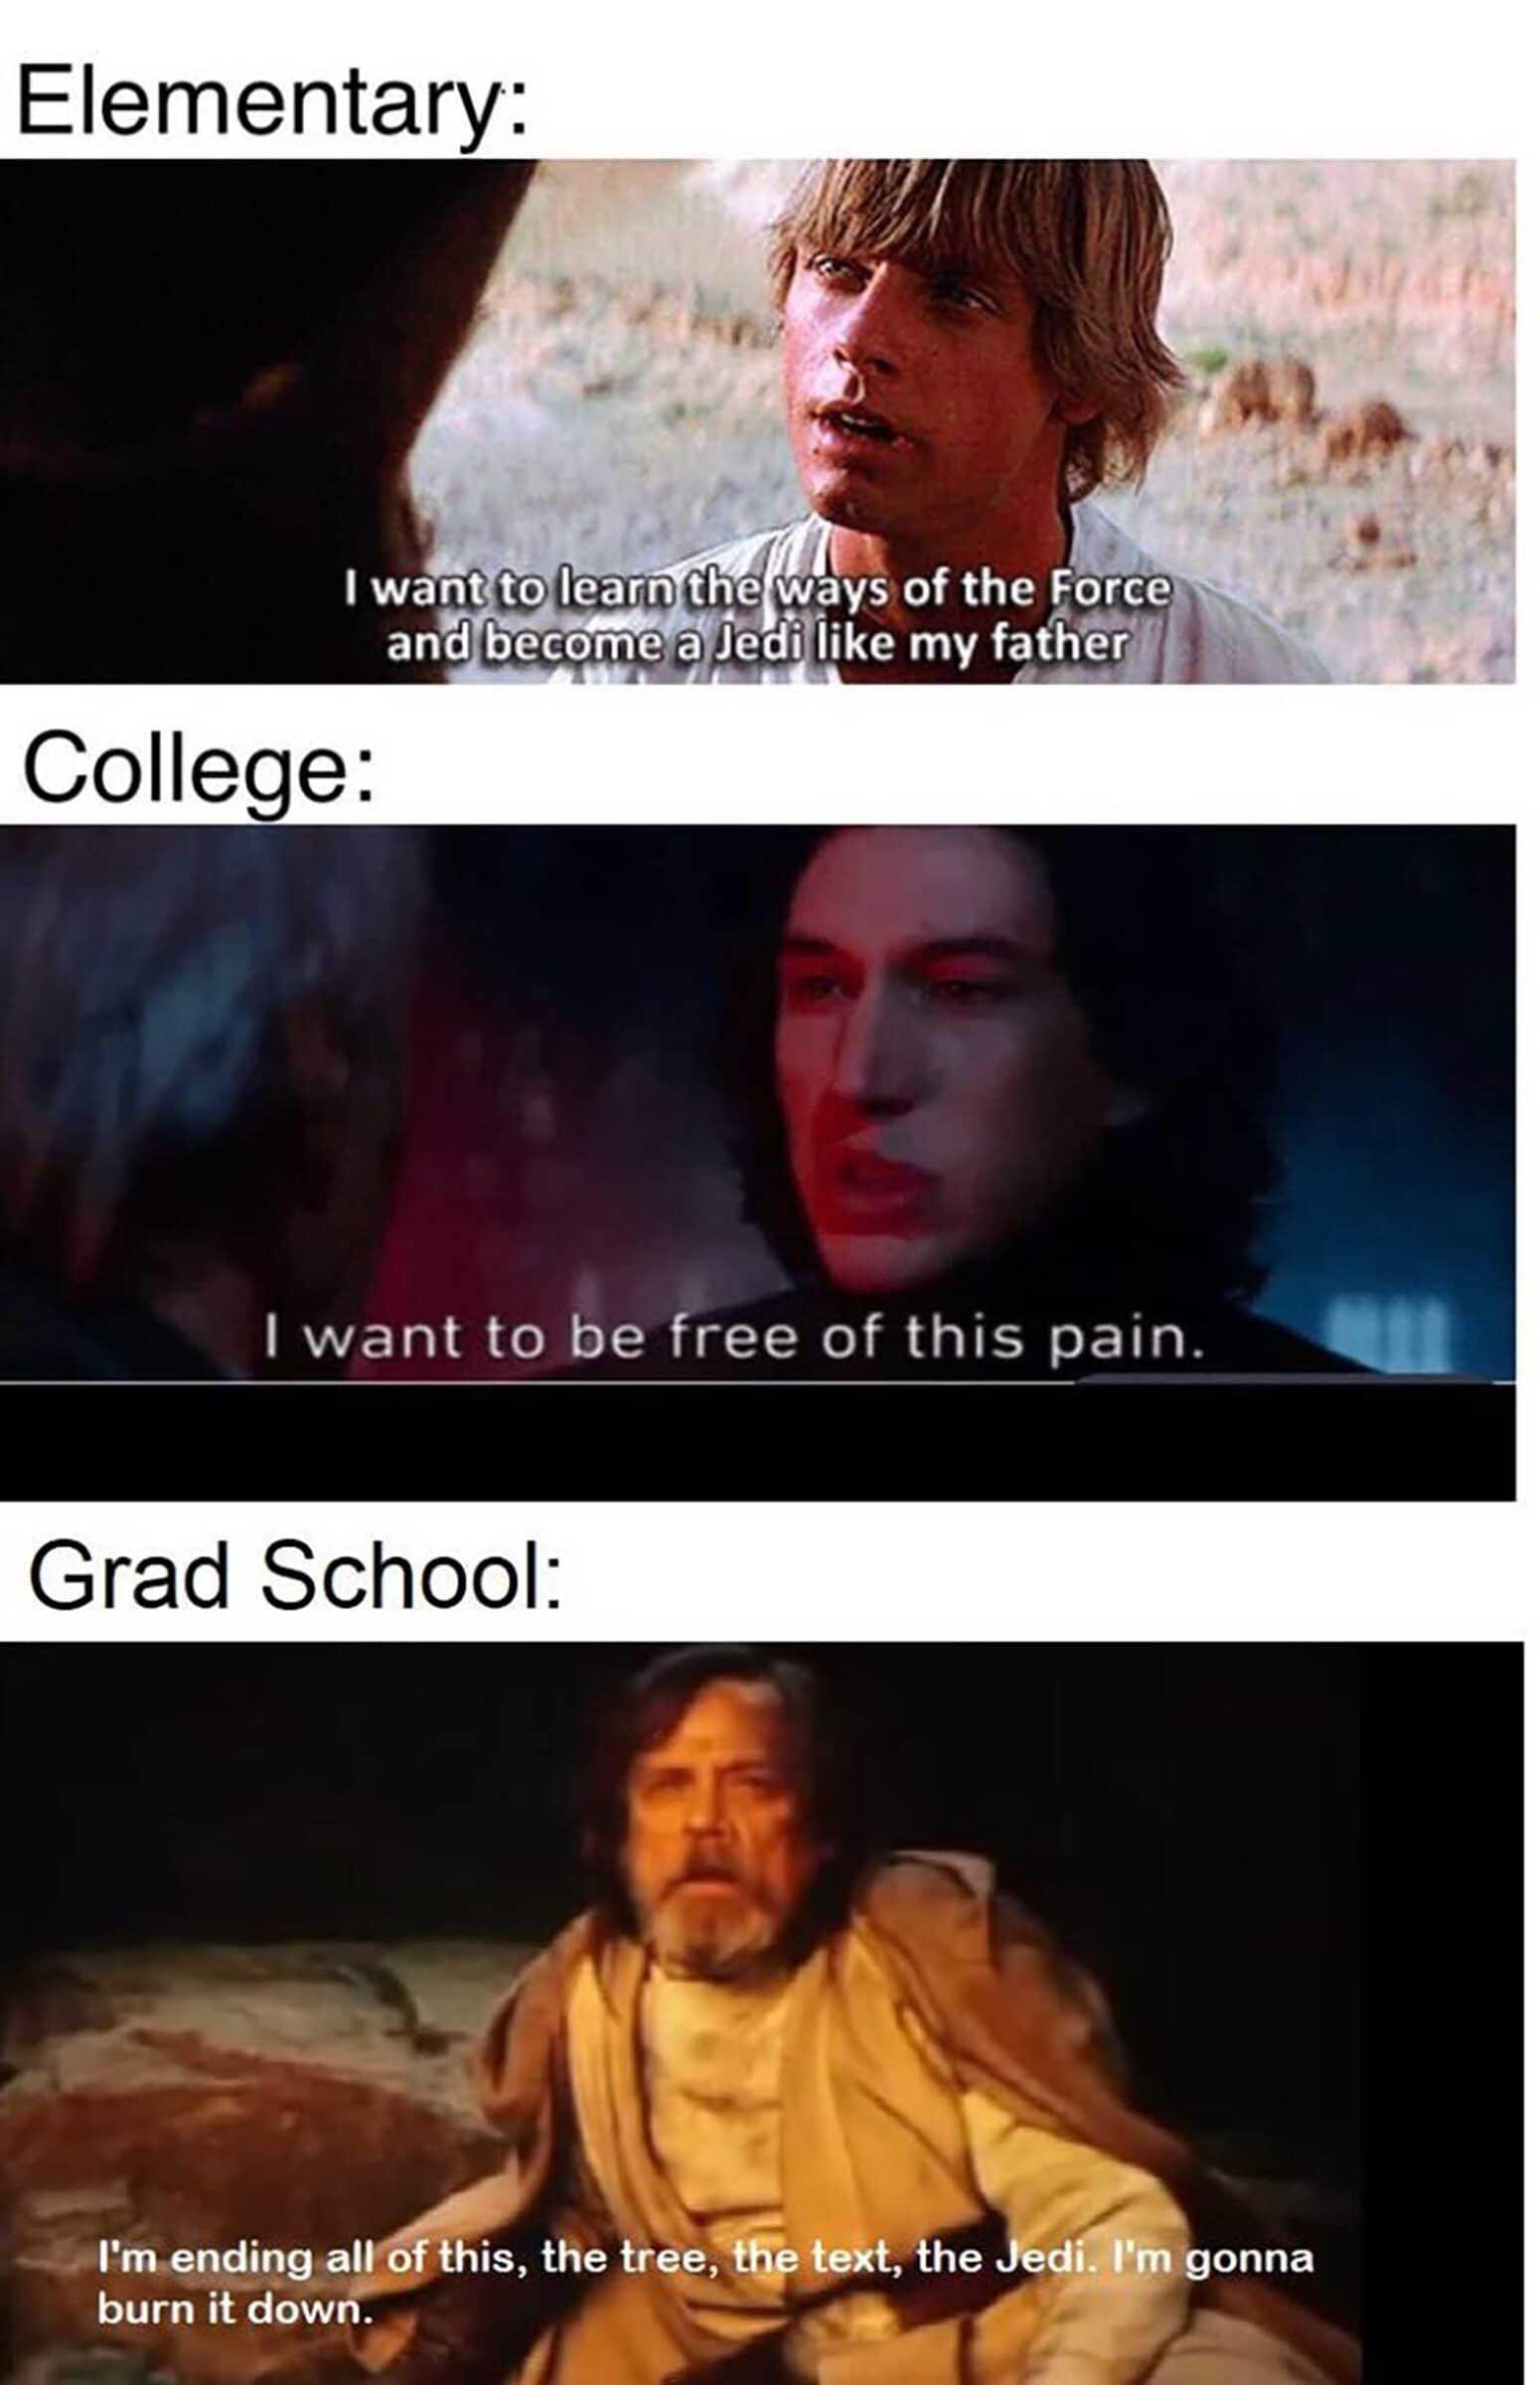 Sequel-memes,  Star Wars Memes Sequel-memes,  text: Elementary: I want to learn the ways of the Forc6ikf ané@gcomqa Jed7iike my fatherf College: I want to be free of this pain. Grad School: I'm ending al of this, the tree, t@text, the edl. I'm gonna burn it down. 